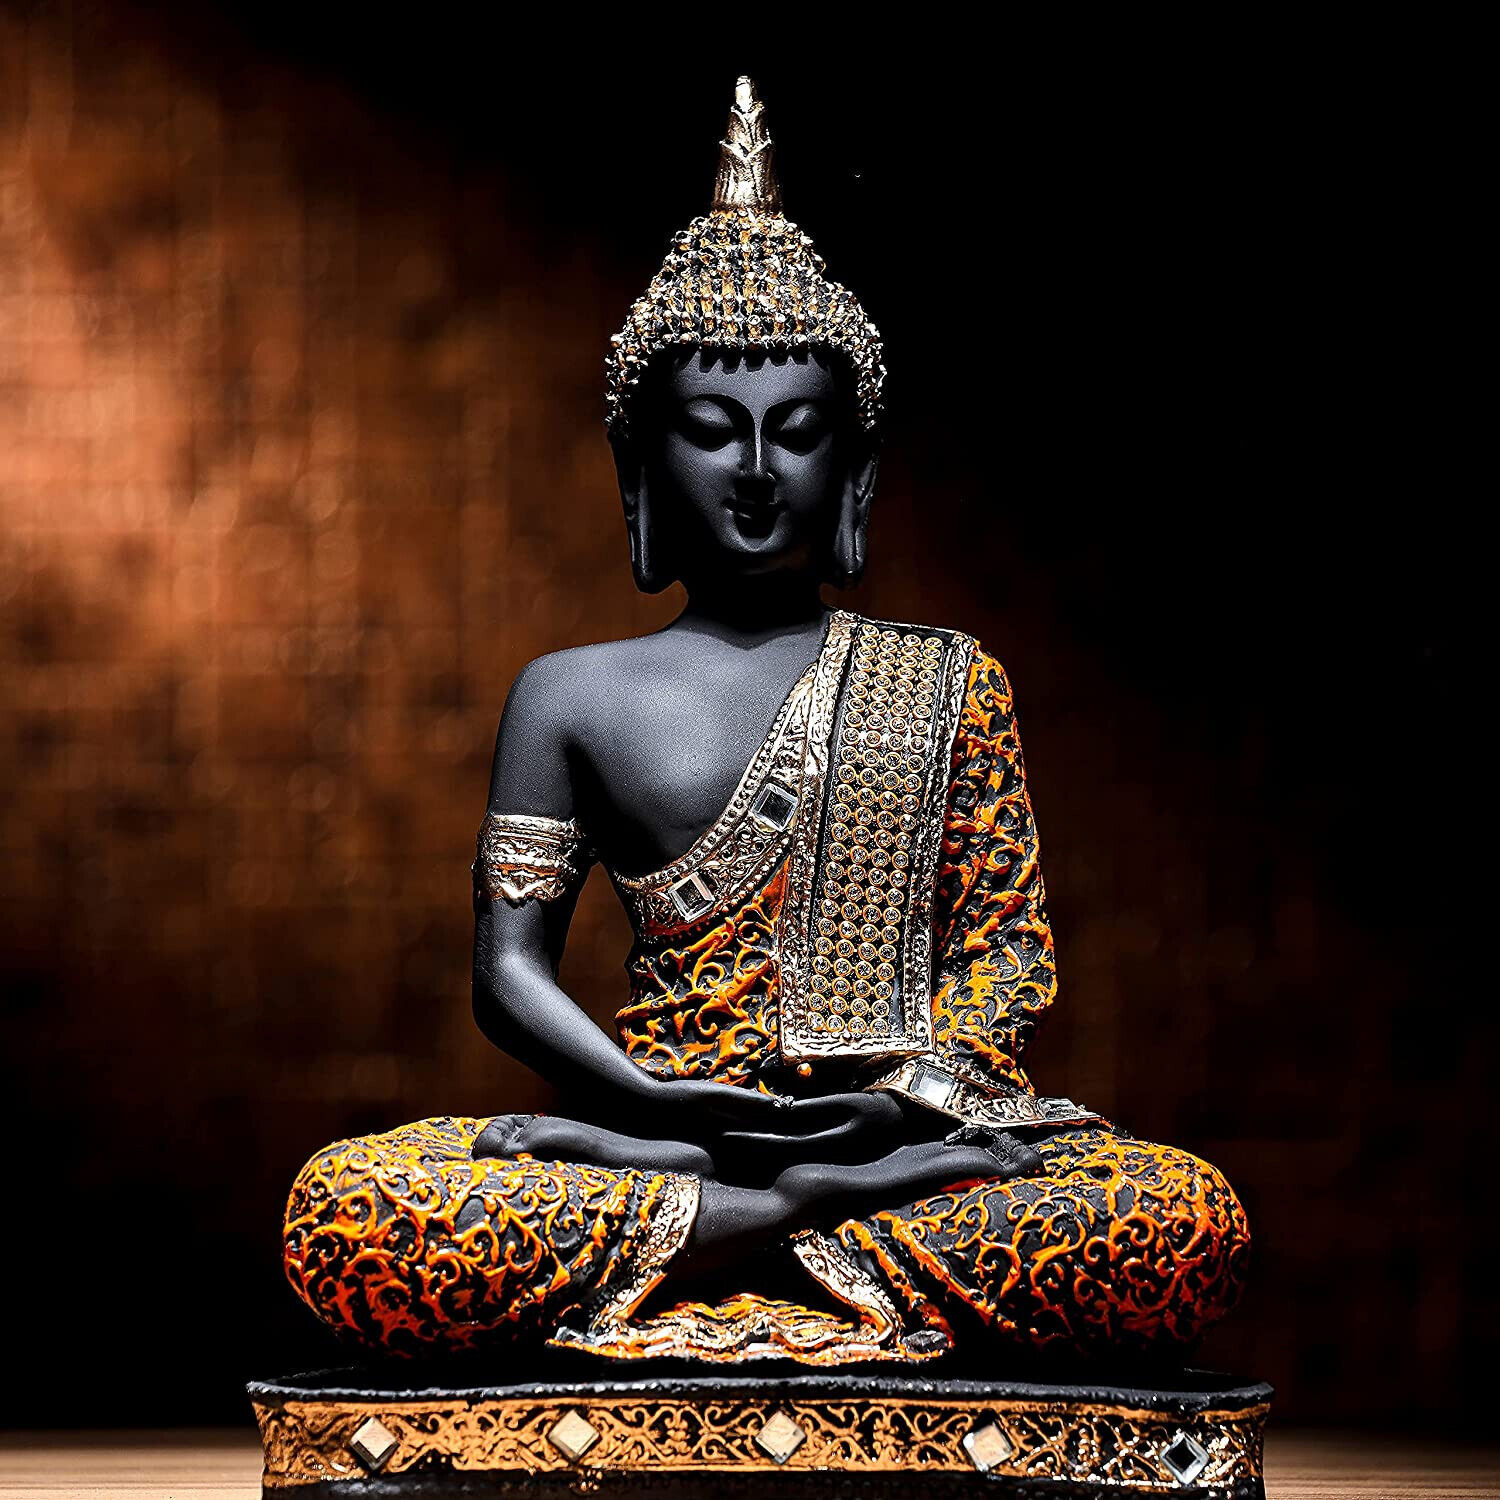 Polyresin Sitting Buddha Statue Showpiece for Home Decor & Gifting